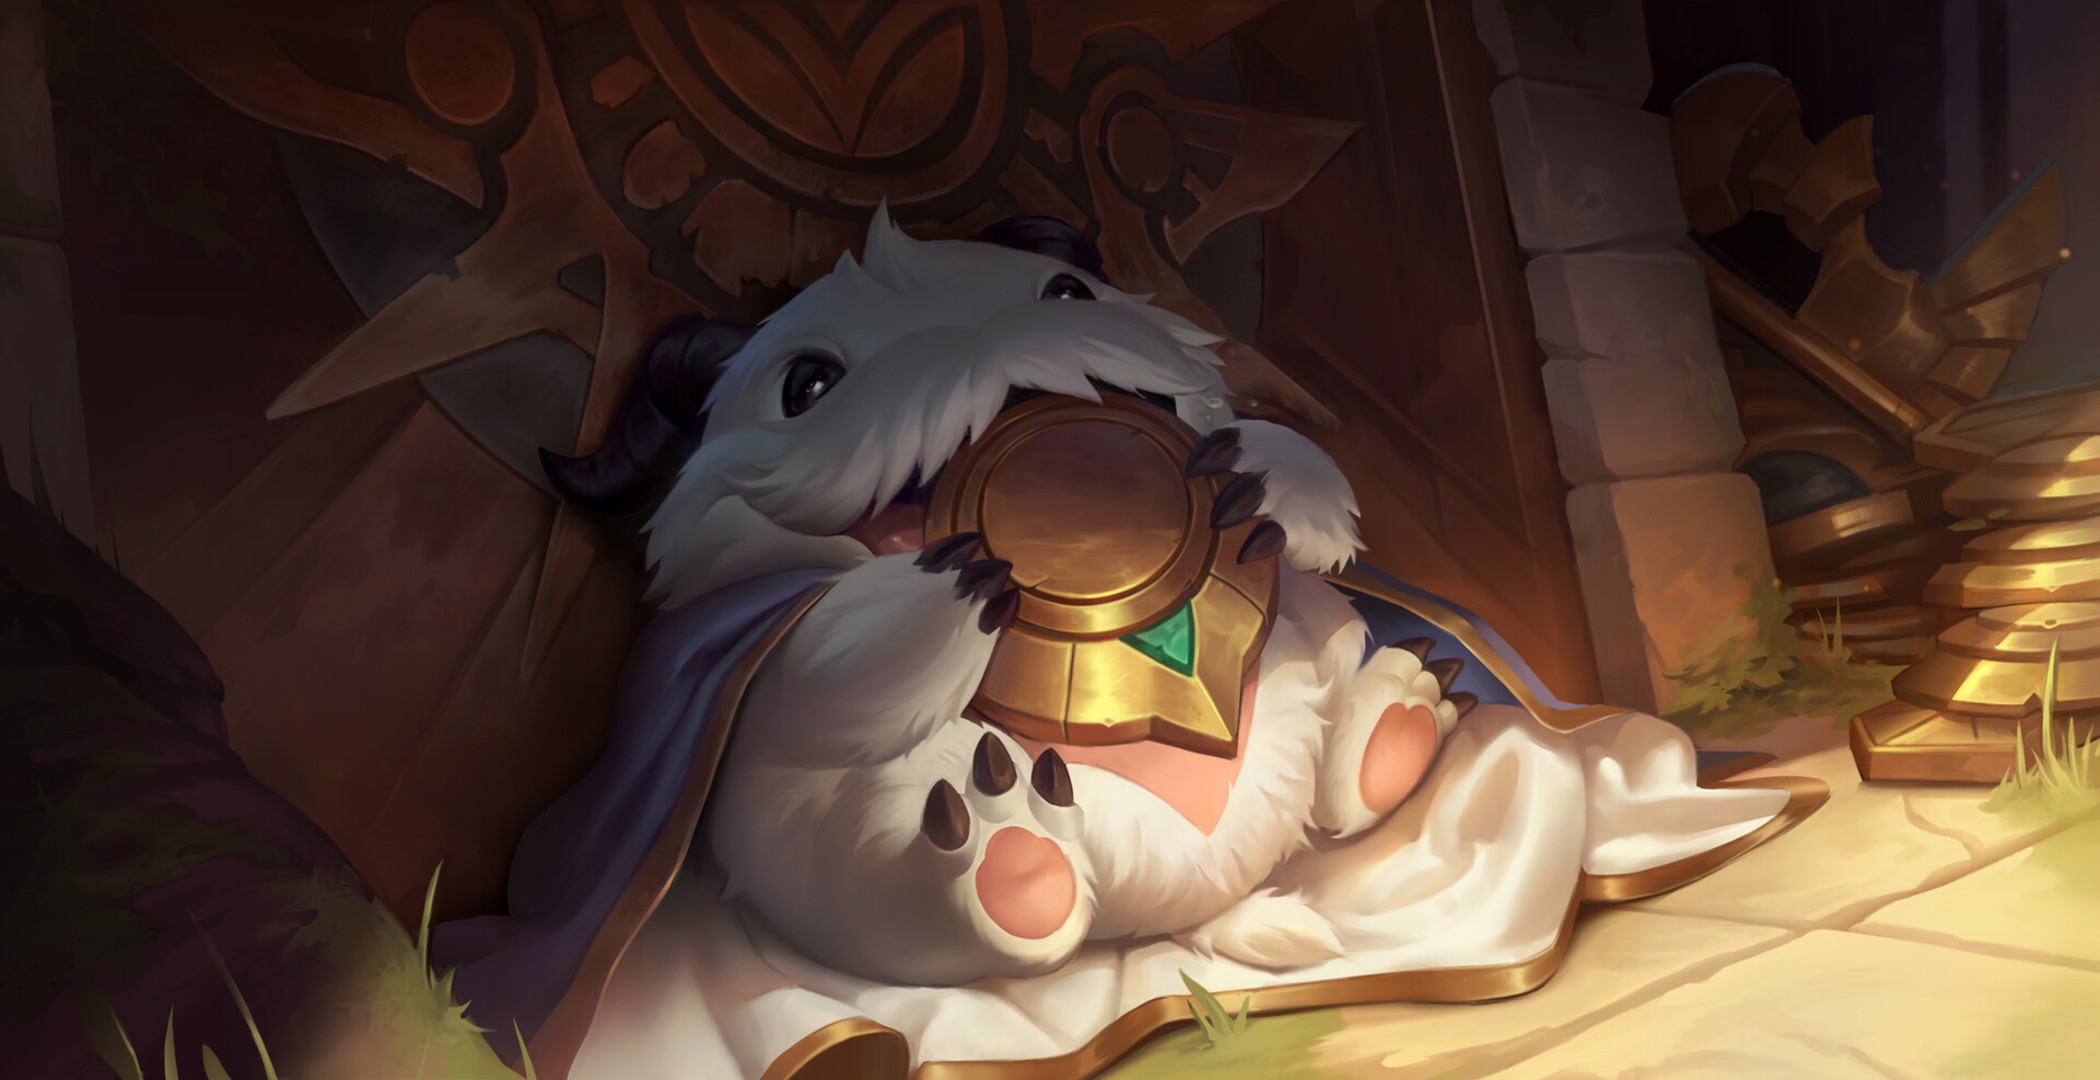 Destined Poro by Marie Magny